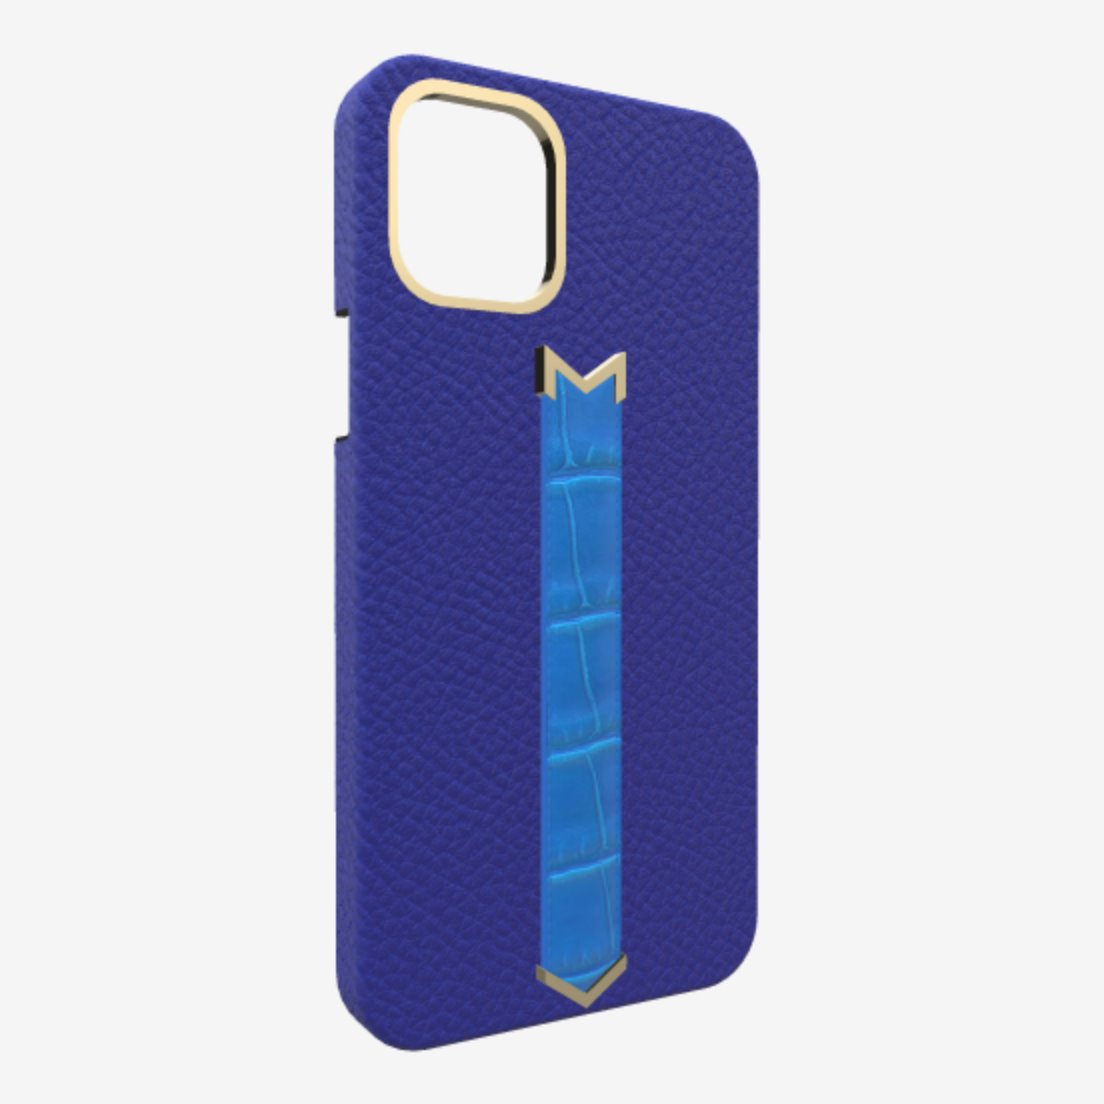 Gold Finger Strap Case for iPhone 13 Pro Max in Genuine Calfskin and Alligator Electric Blue Royal Blue 